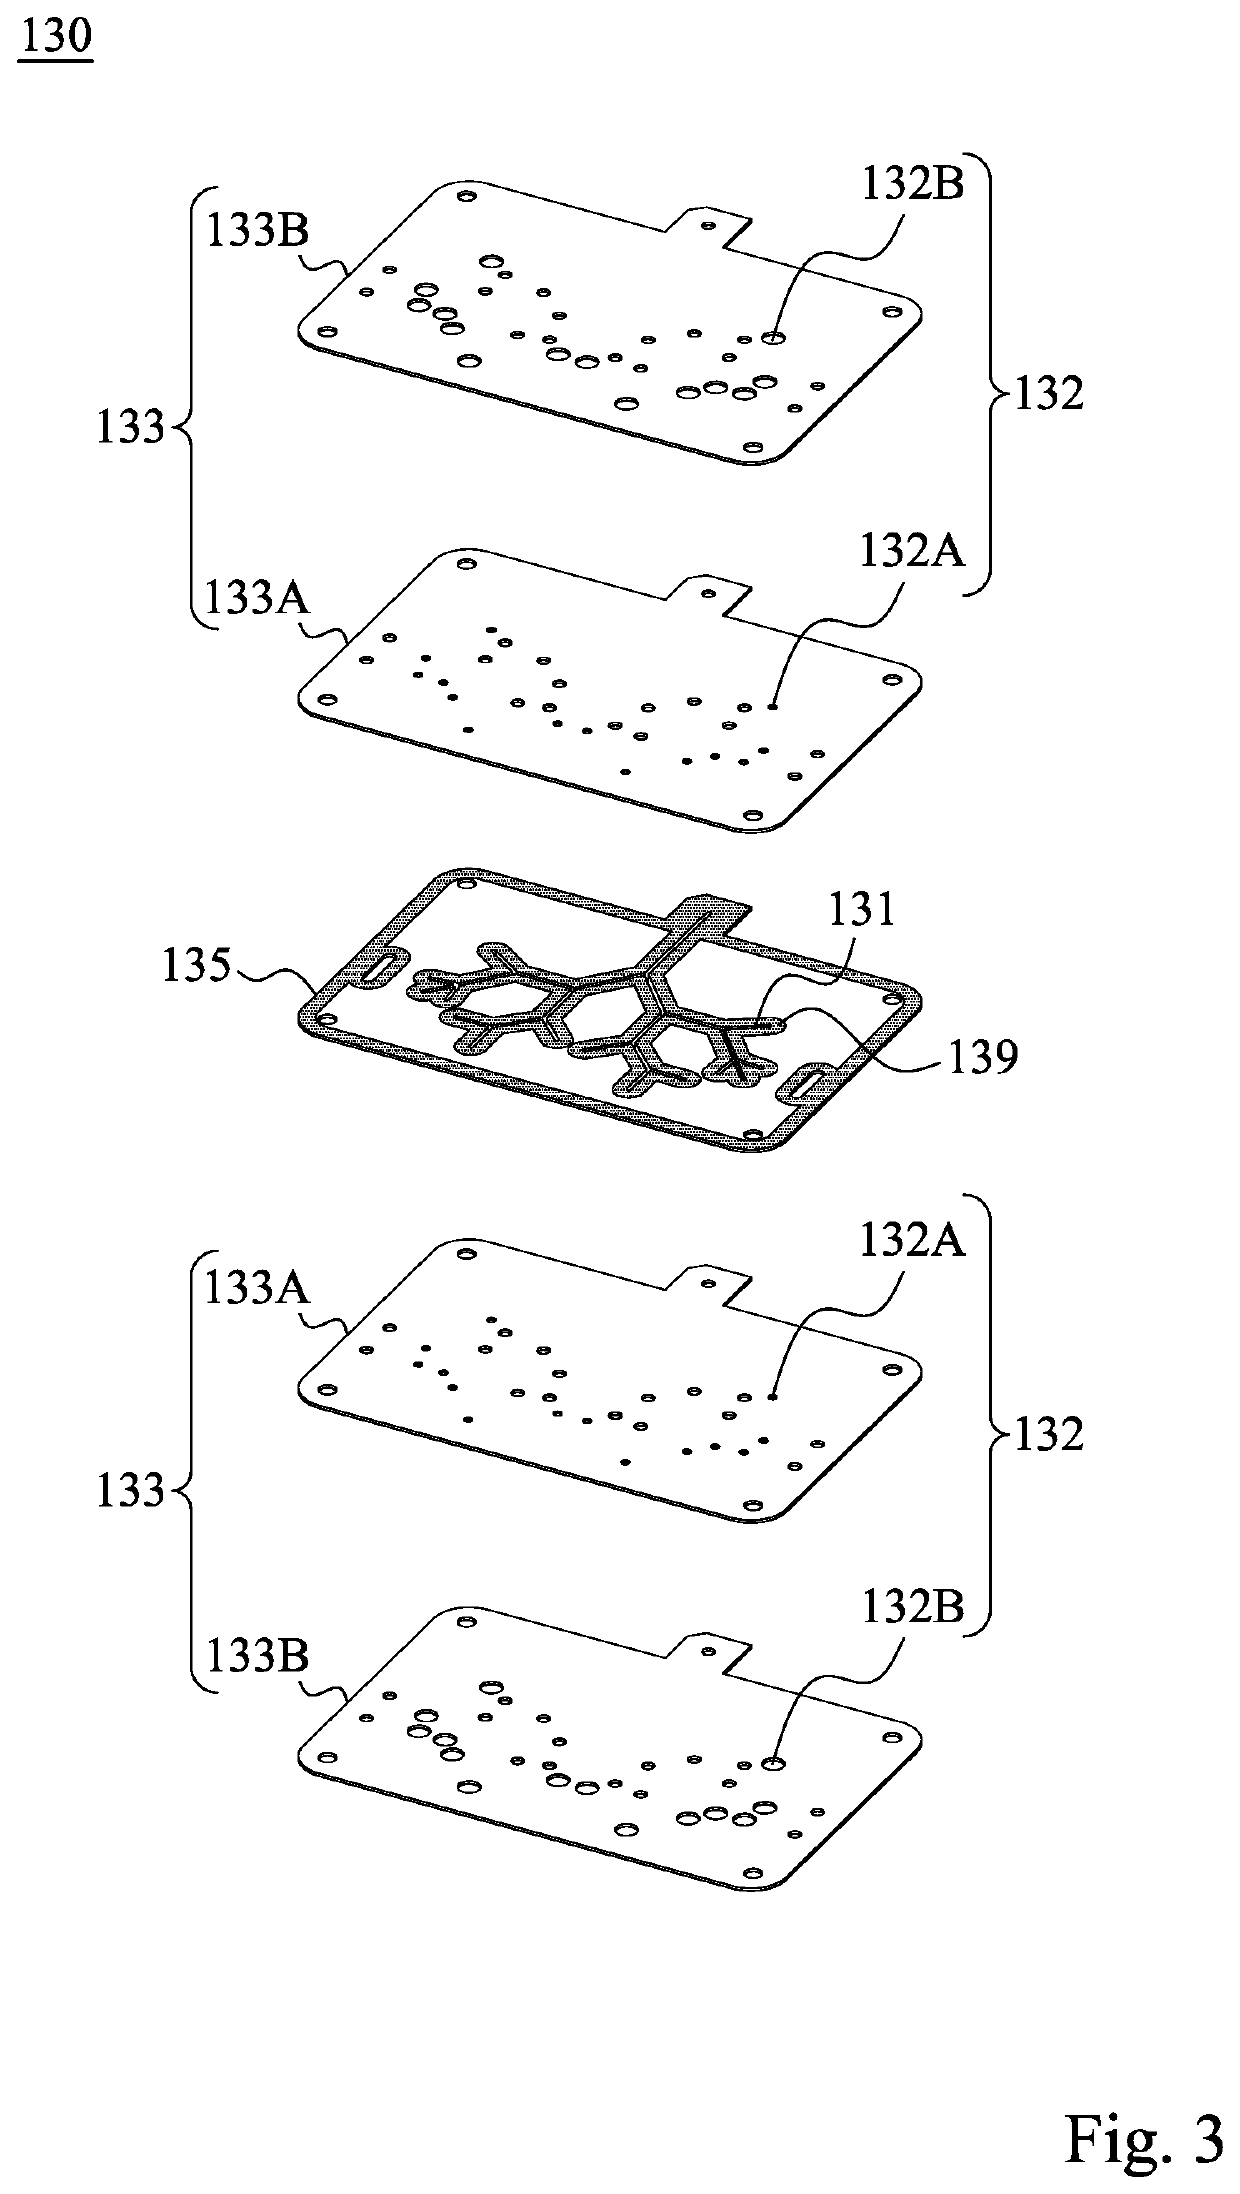 Imitating lung device, system for simulating human lung, method for simulating human breathing, system for simulating deposition of substance in human lung and method of the same